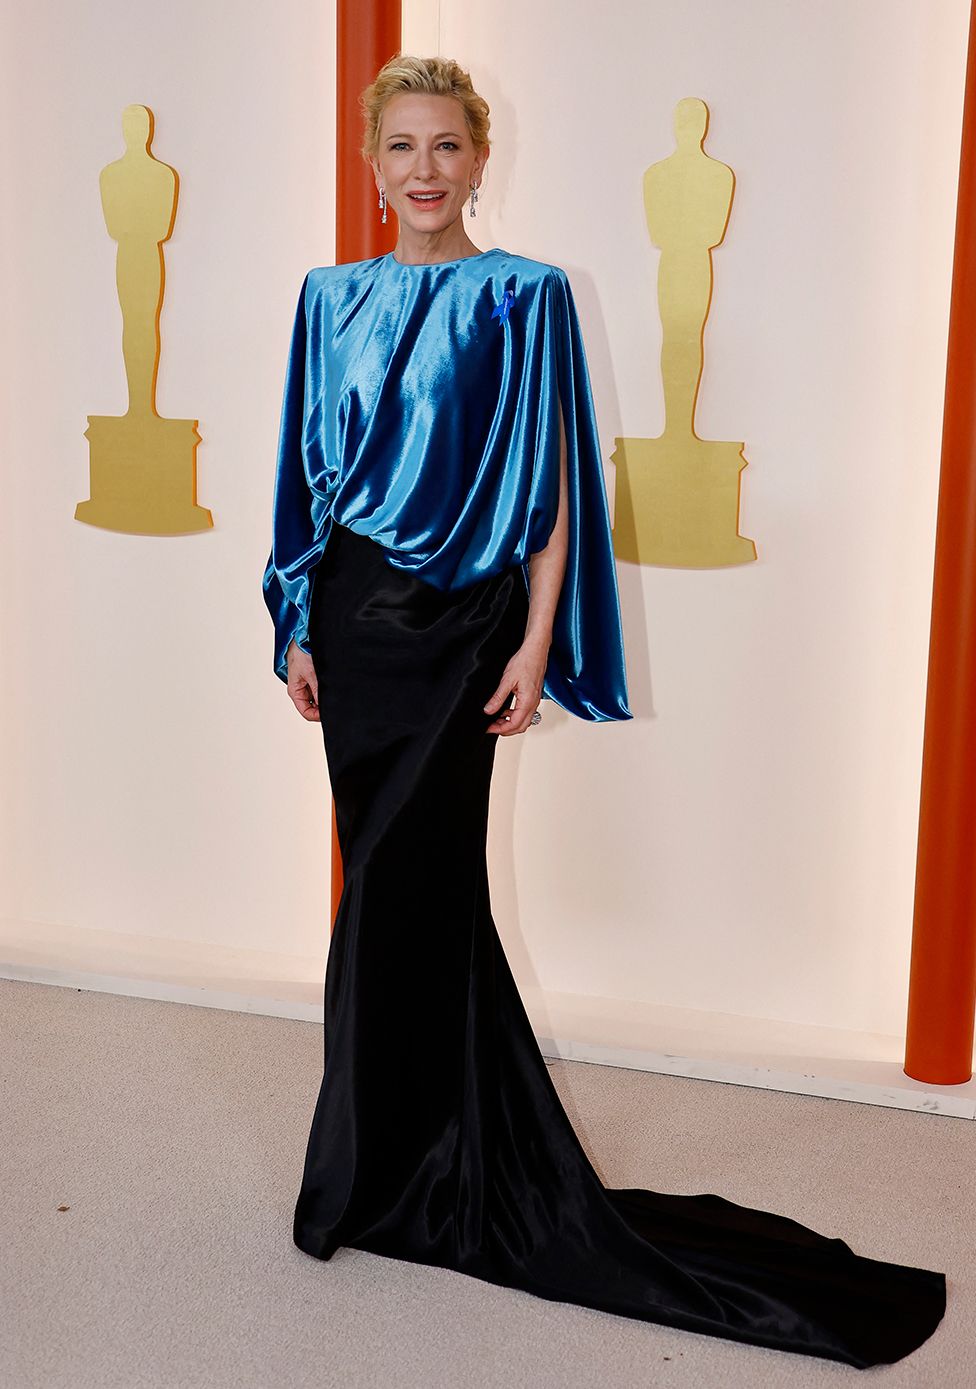 Cate Blanchett poses on the champagne-colored red carpet during the Oscars arrivals at the 95th Academy Awards in Hollywood, Los Angeles, California, U.S., March 12, 2023